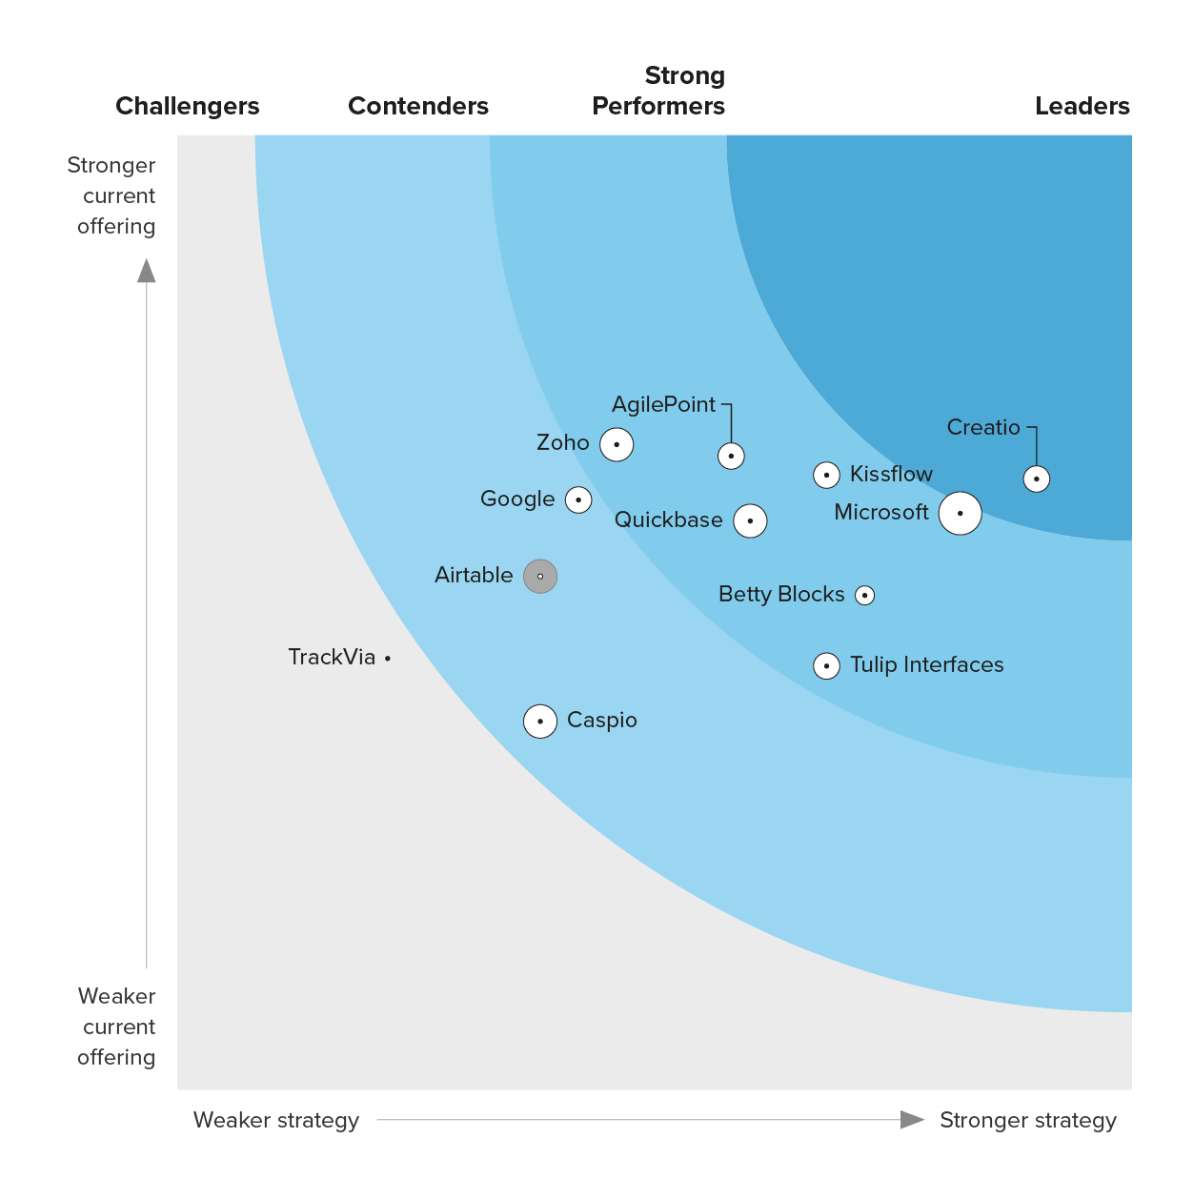  Creatio named THE LEADER IN THE FORRESTER WAVE™